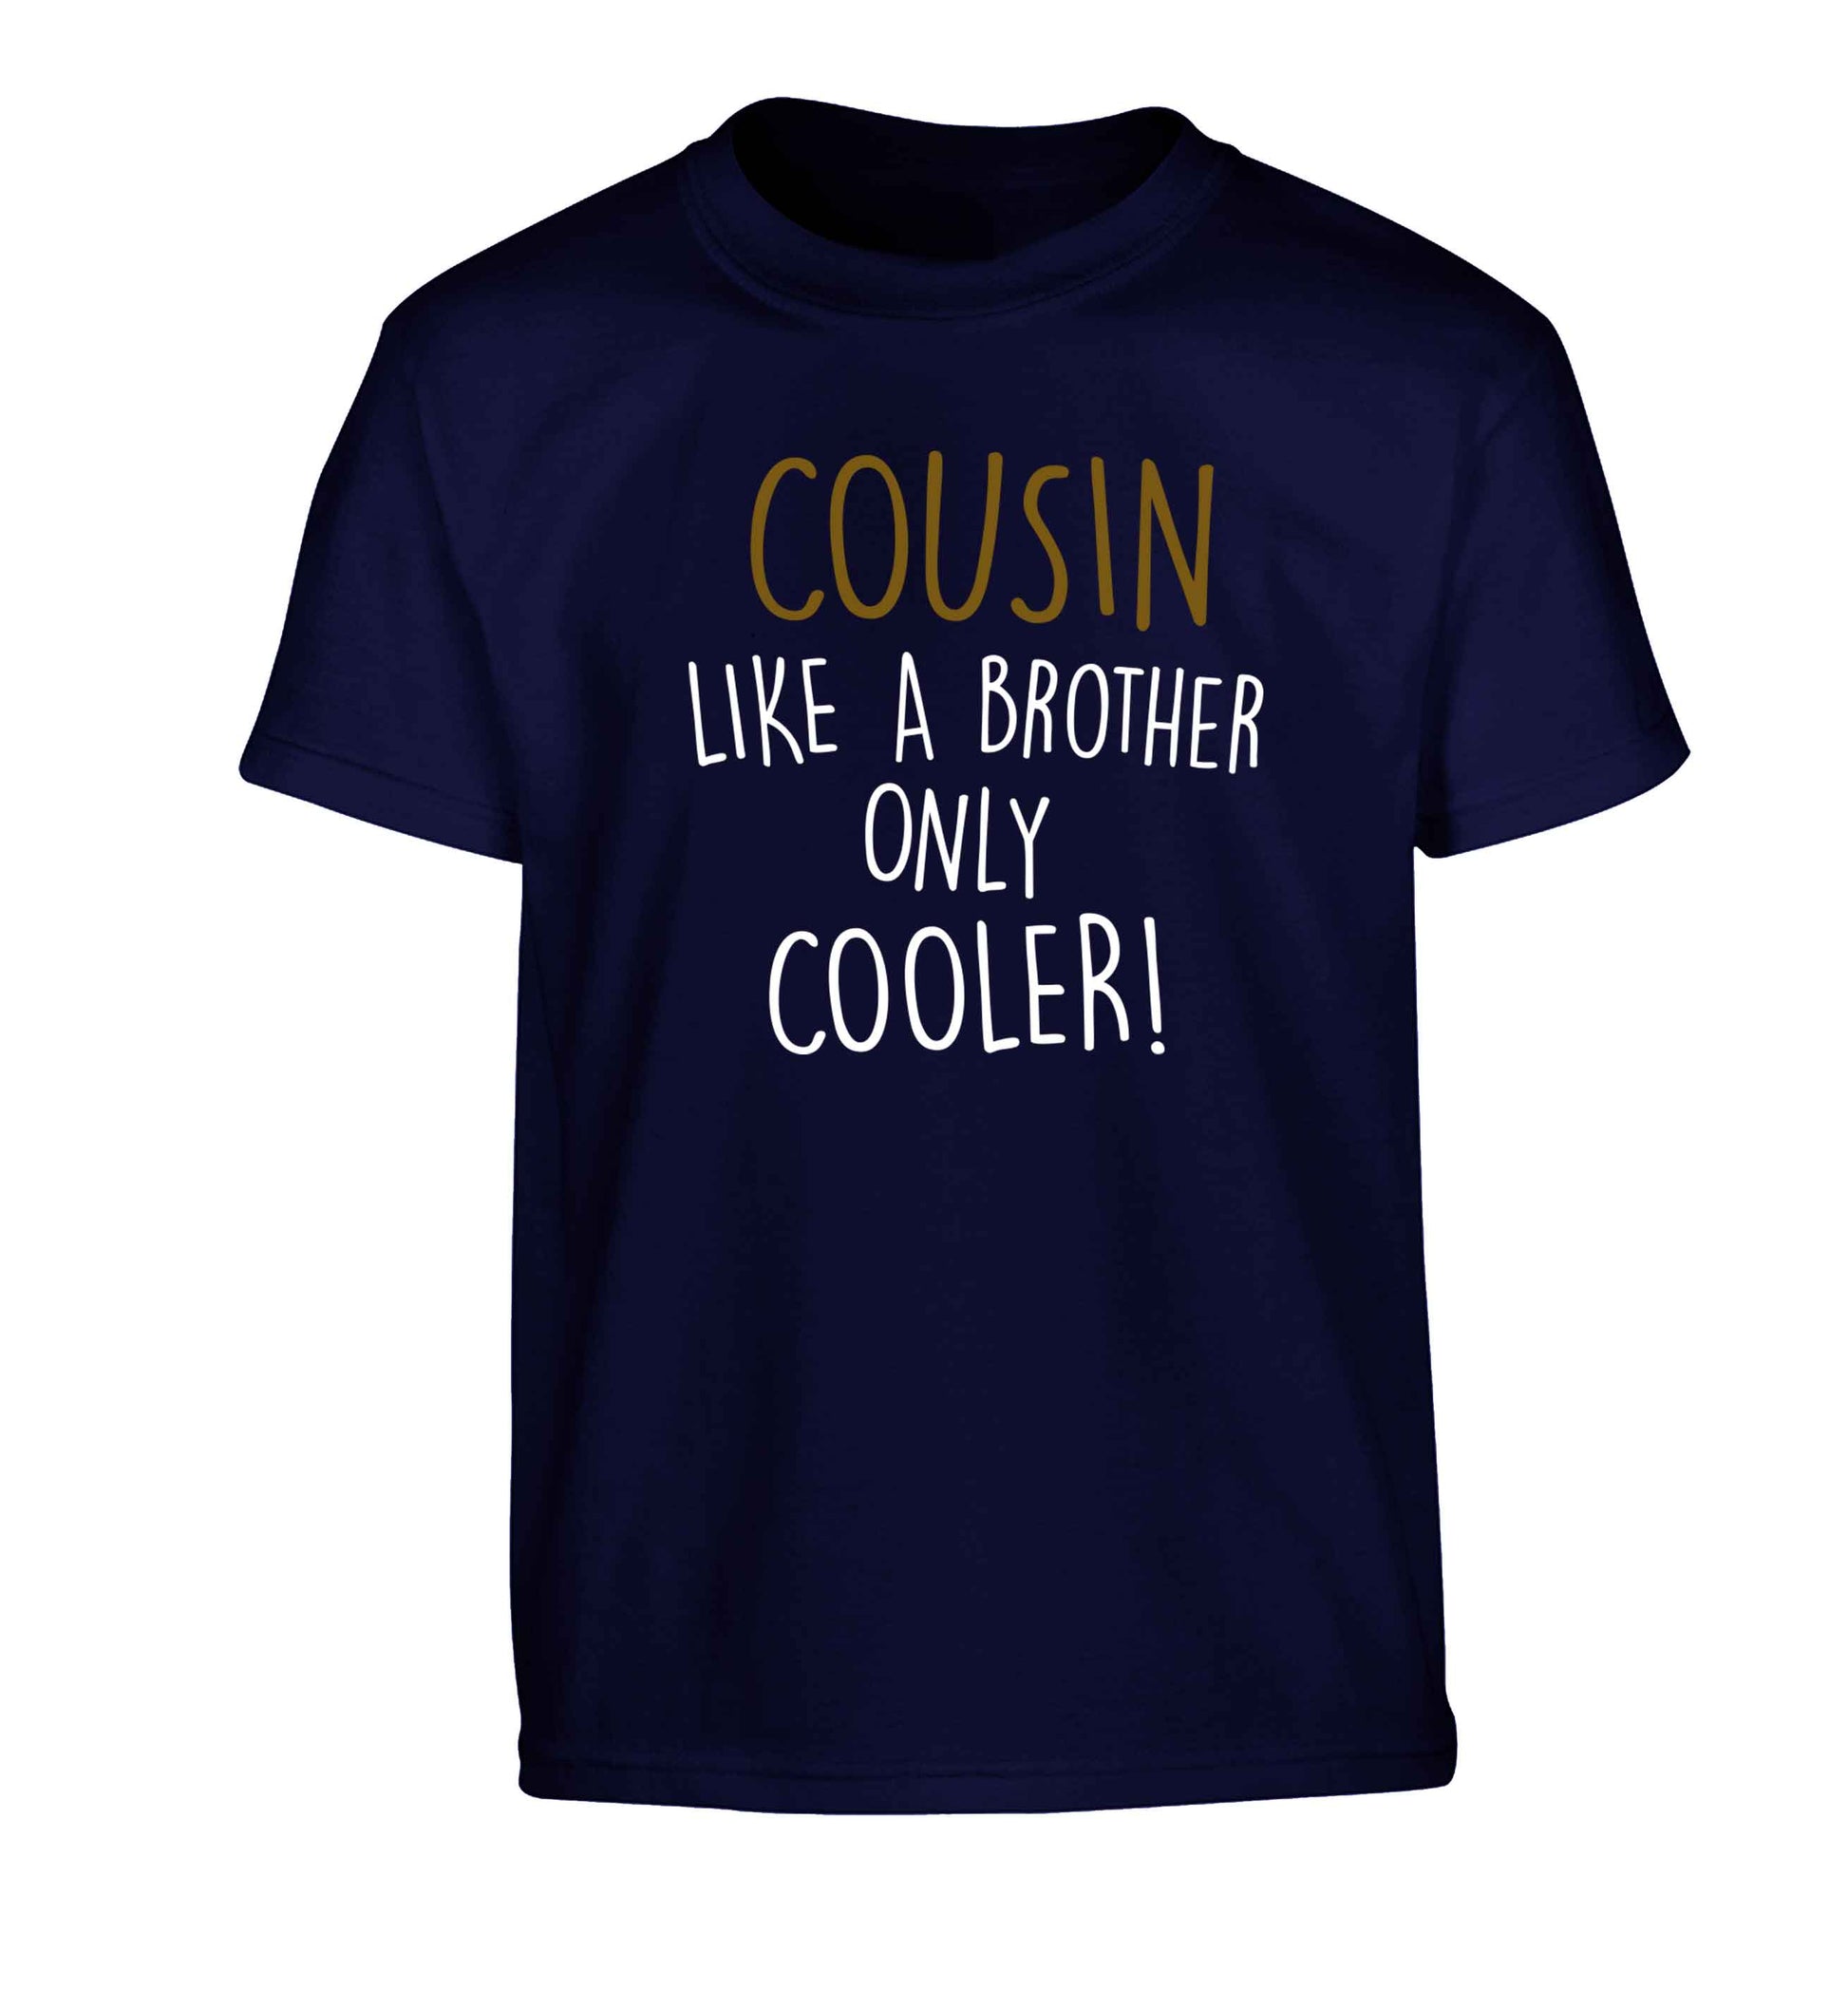 Cousin like a brother only cooler Children's navy Tshirt 12-13 Years